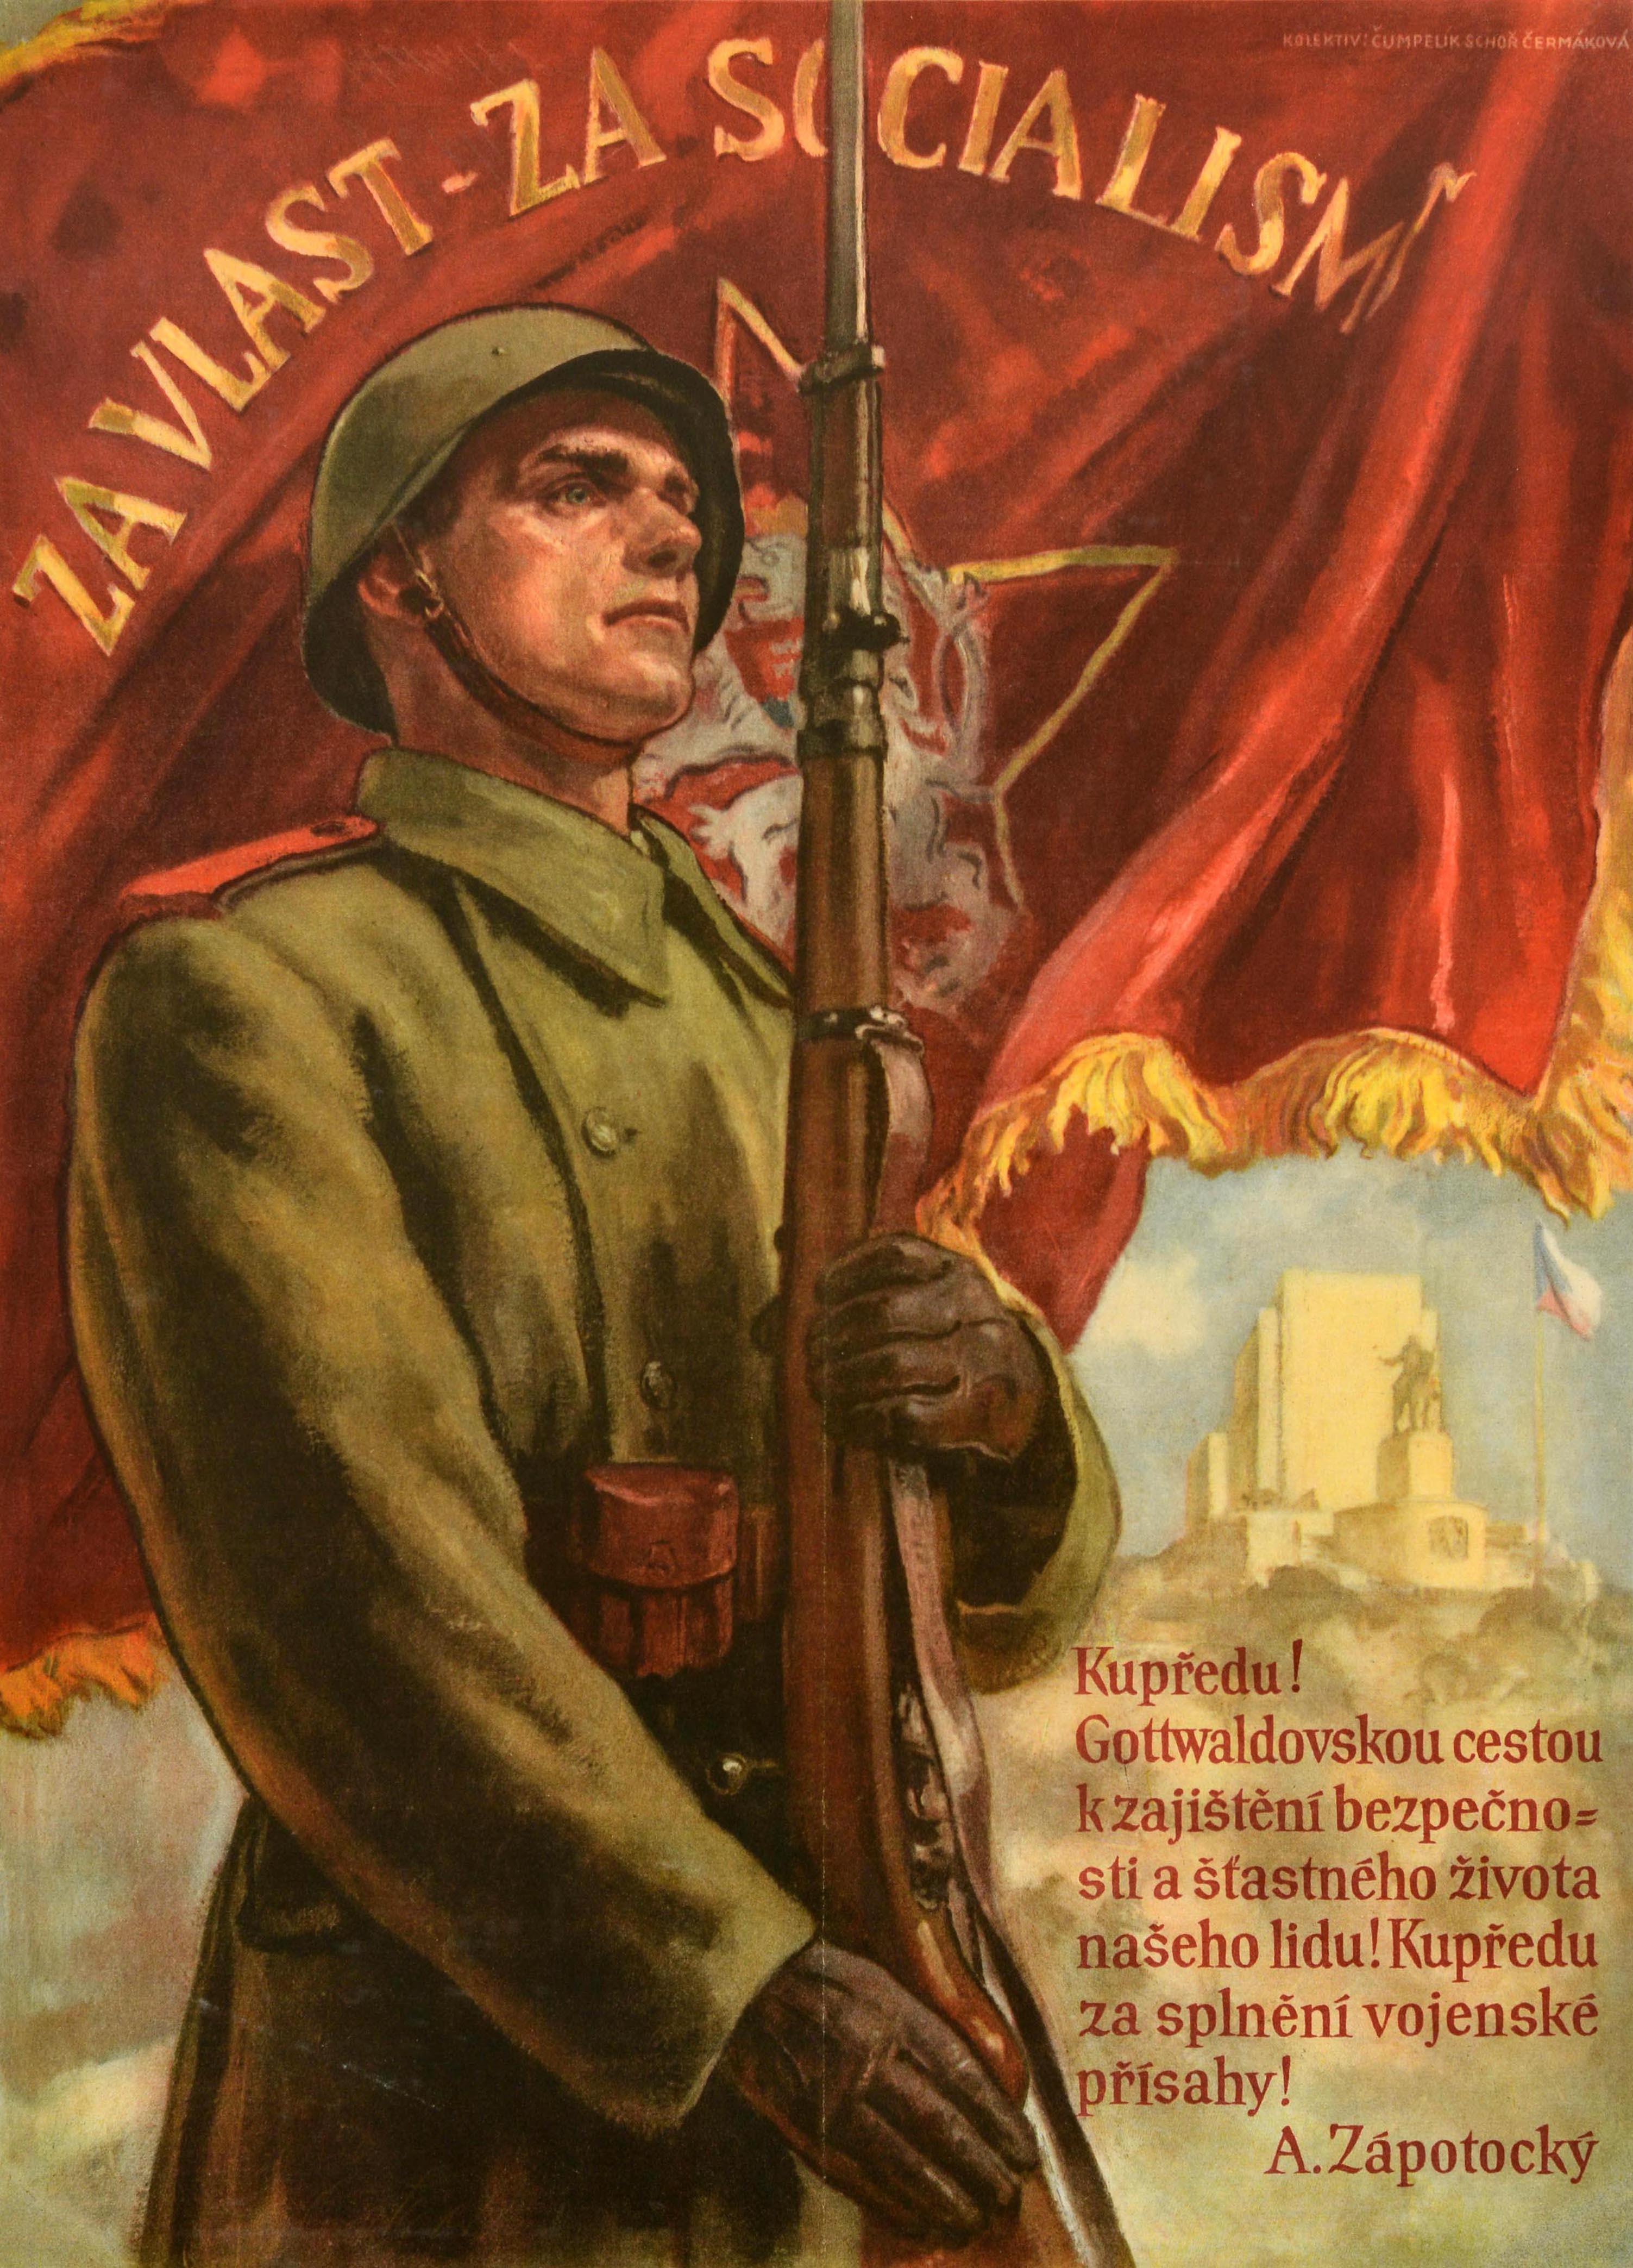 Original vintage Czechoslovak propaganda poster - Za Vlast Za Socialism! / For Motherland For Socialism - featuring dynamic artwork of a soldier in uniform and armed with a rifle gun standing guard in front of the gold title text and silver Bohemian